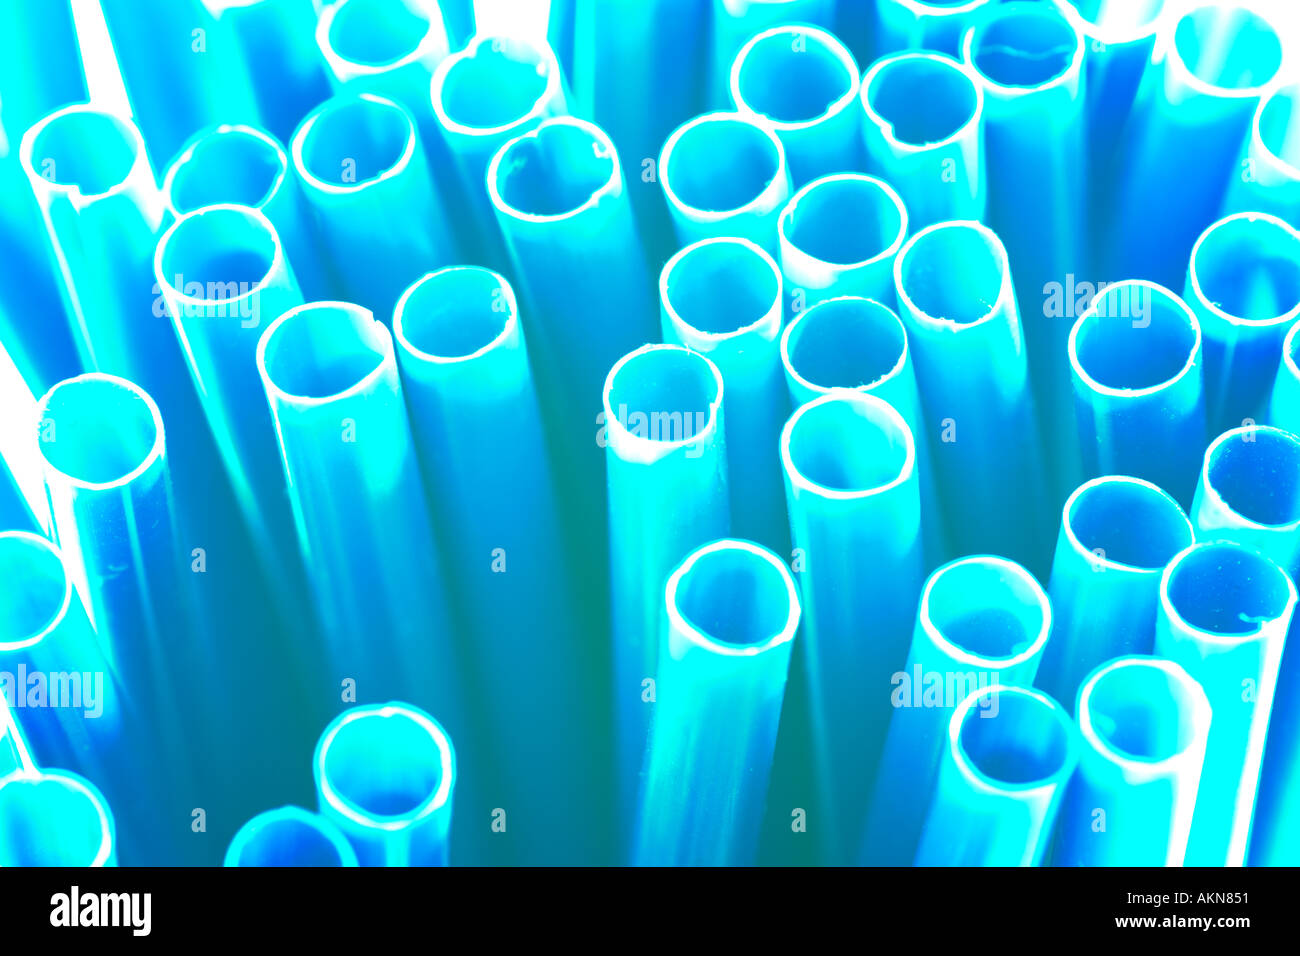 Abstract image of a bundle of drinking straws Stock Photo